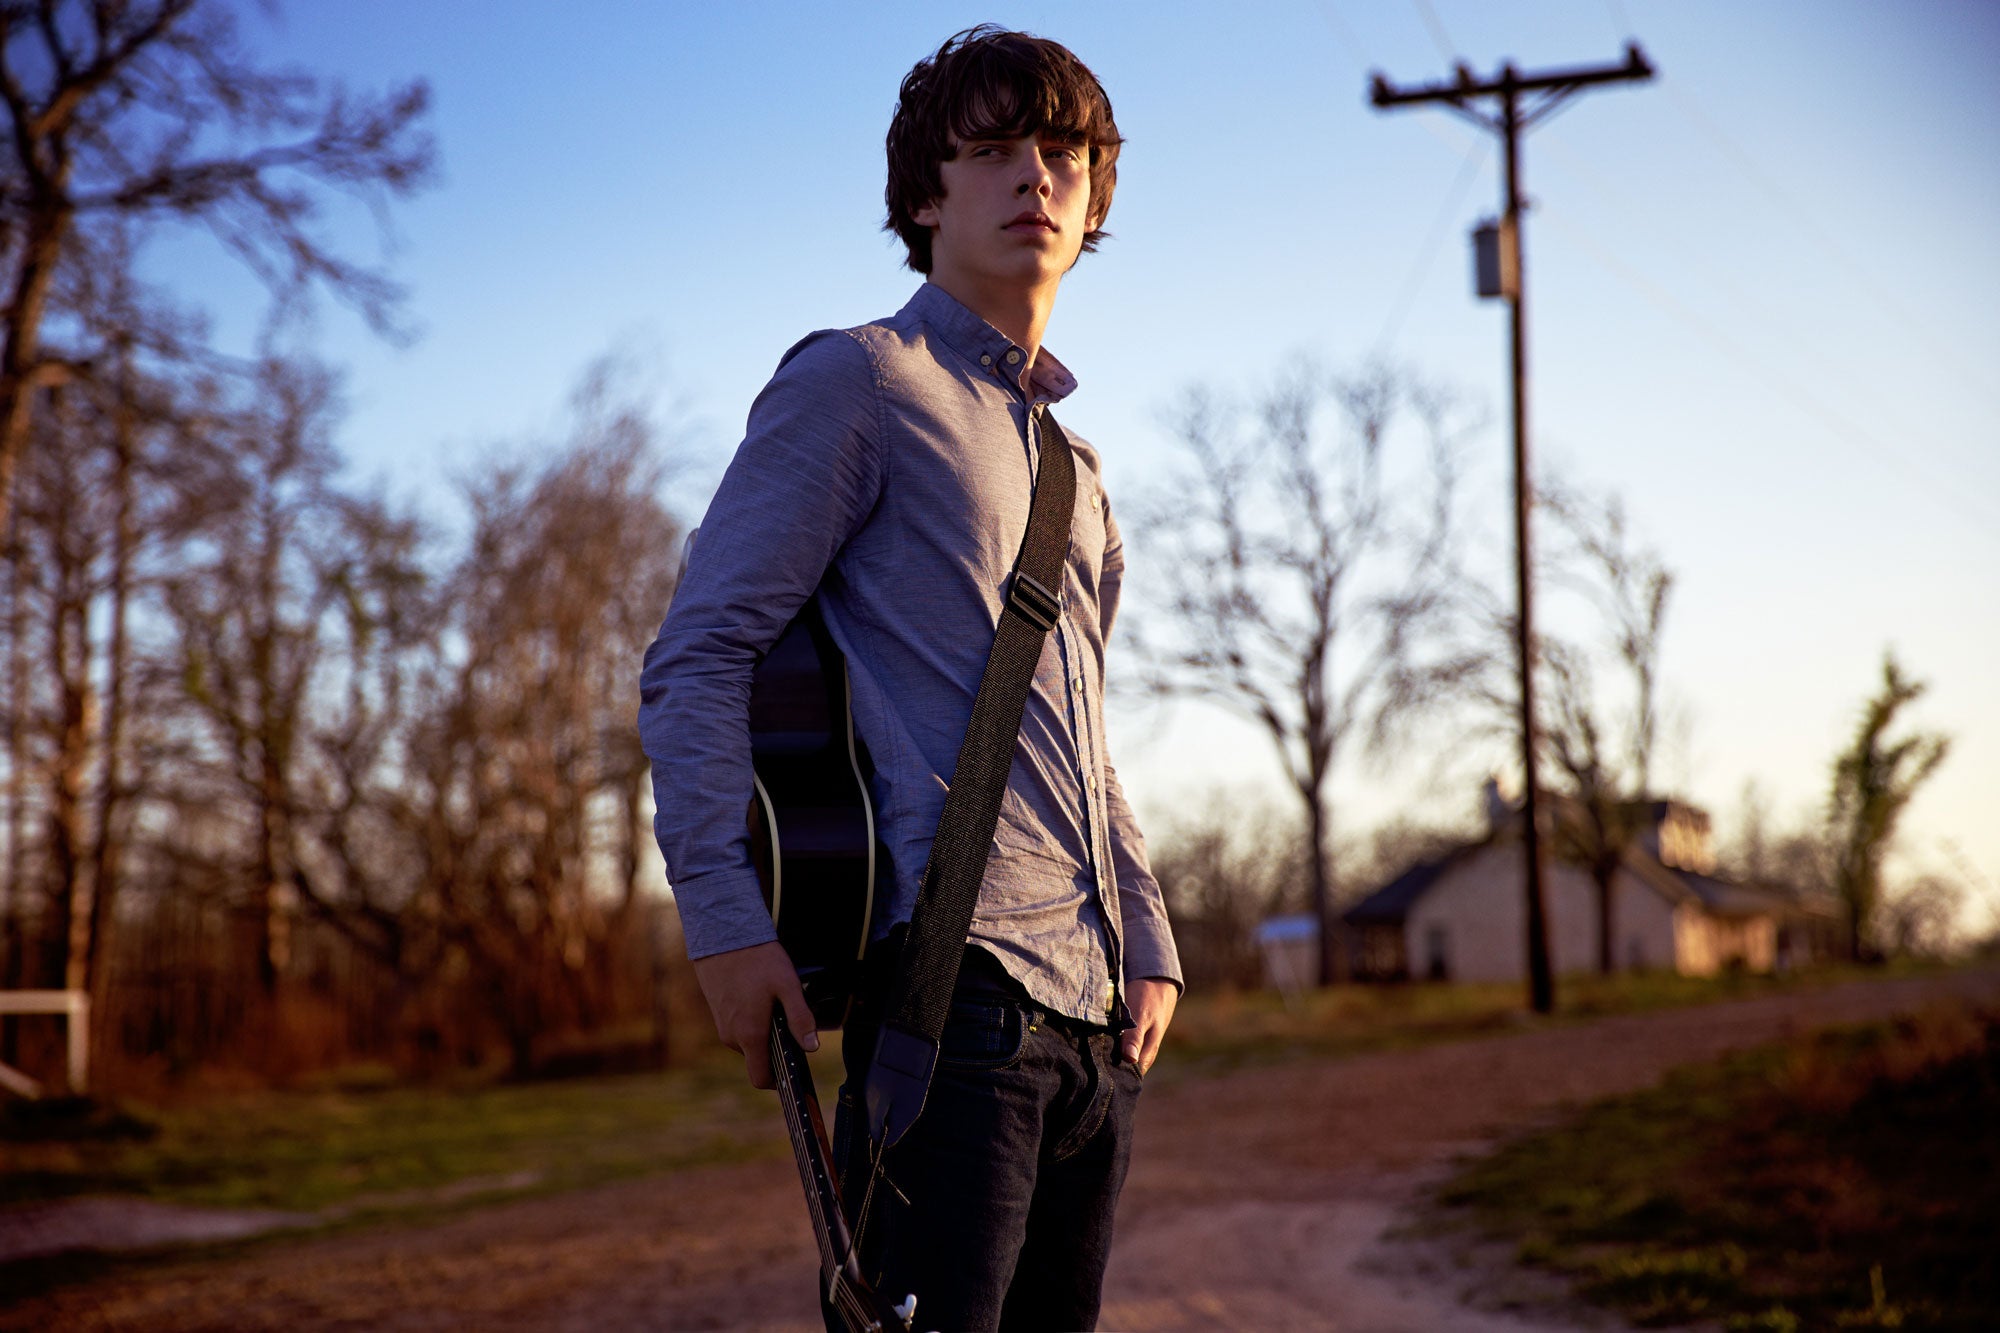 Jake Bugg: “Somebody asked me if I was the voice of a generation recently. I was just, like... what? Me? Why?”